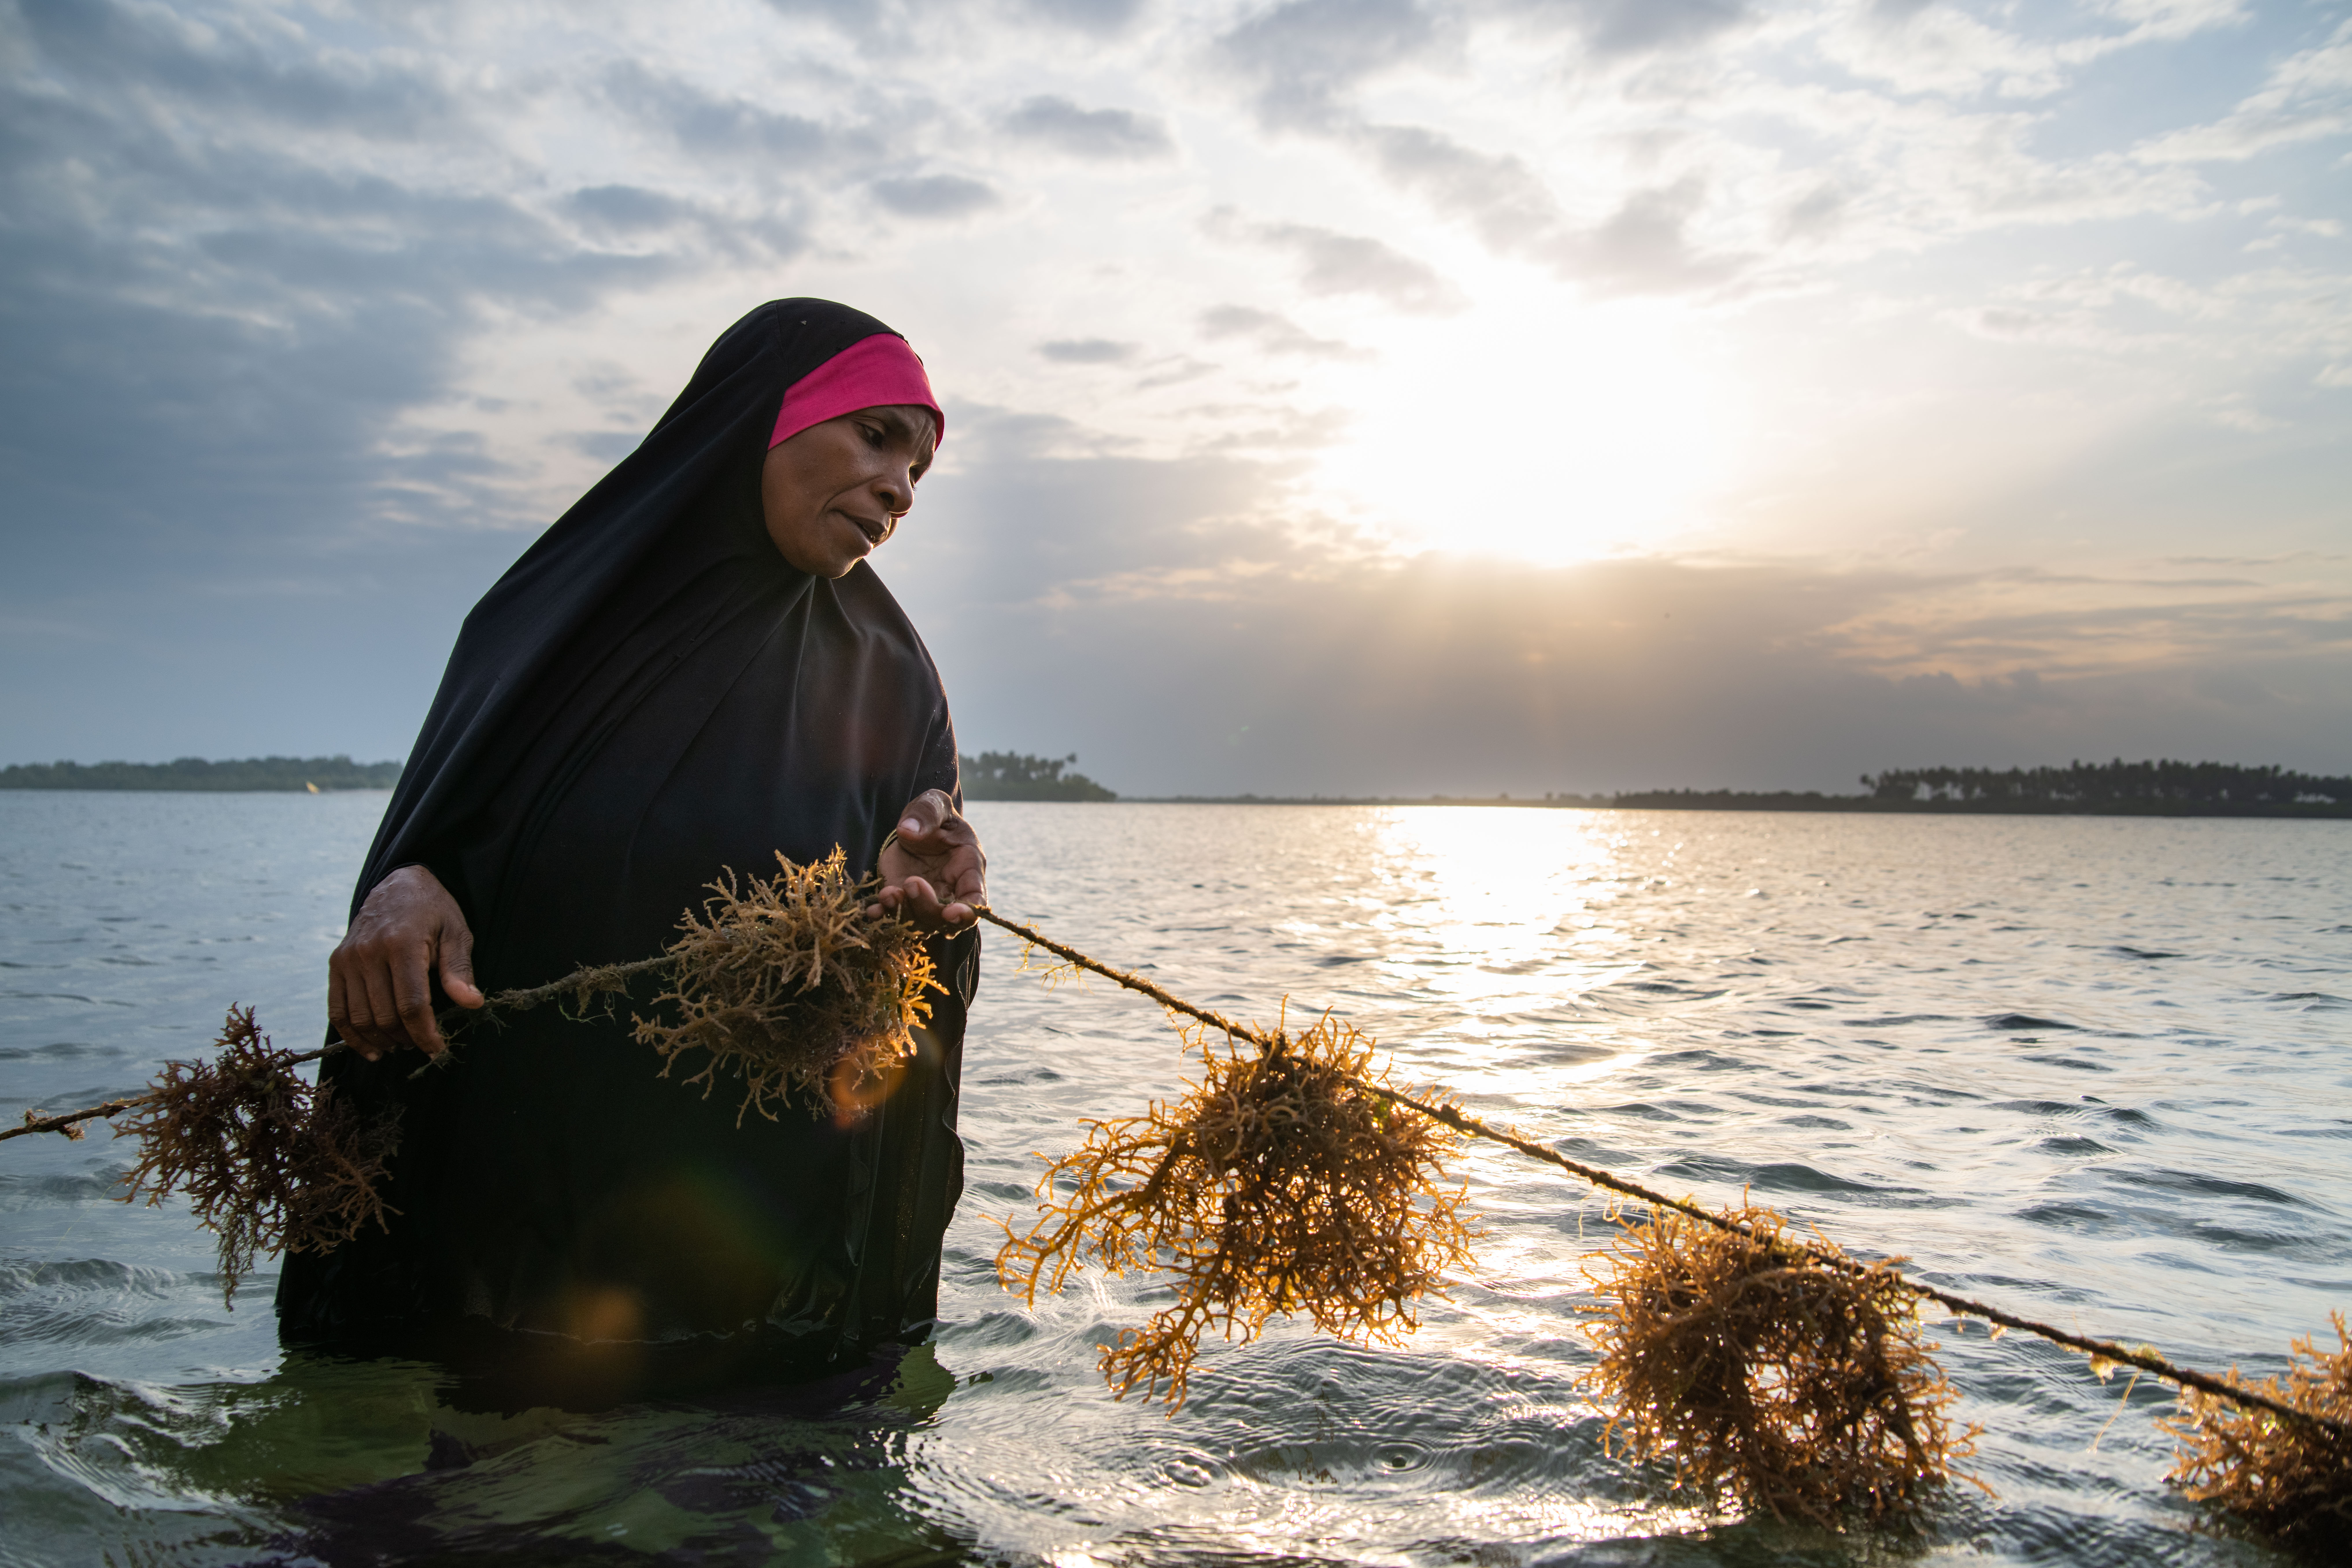 A woman holds a line of cultivated seaweed in shallow water in Tanzania.